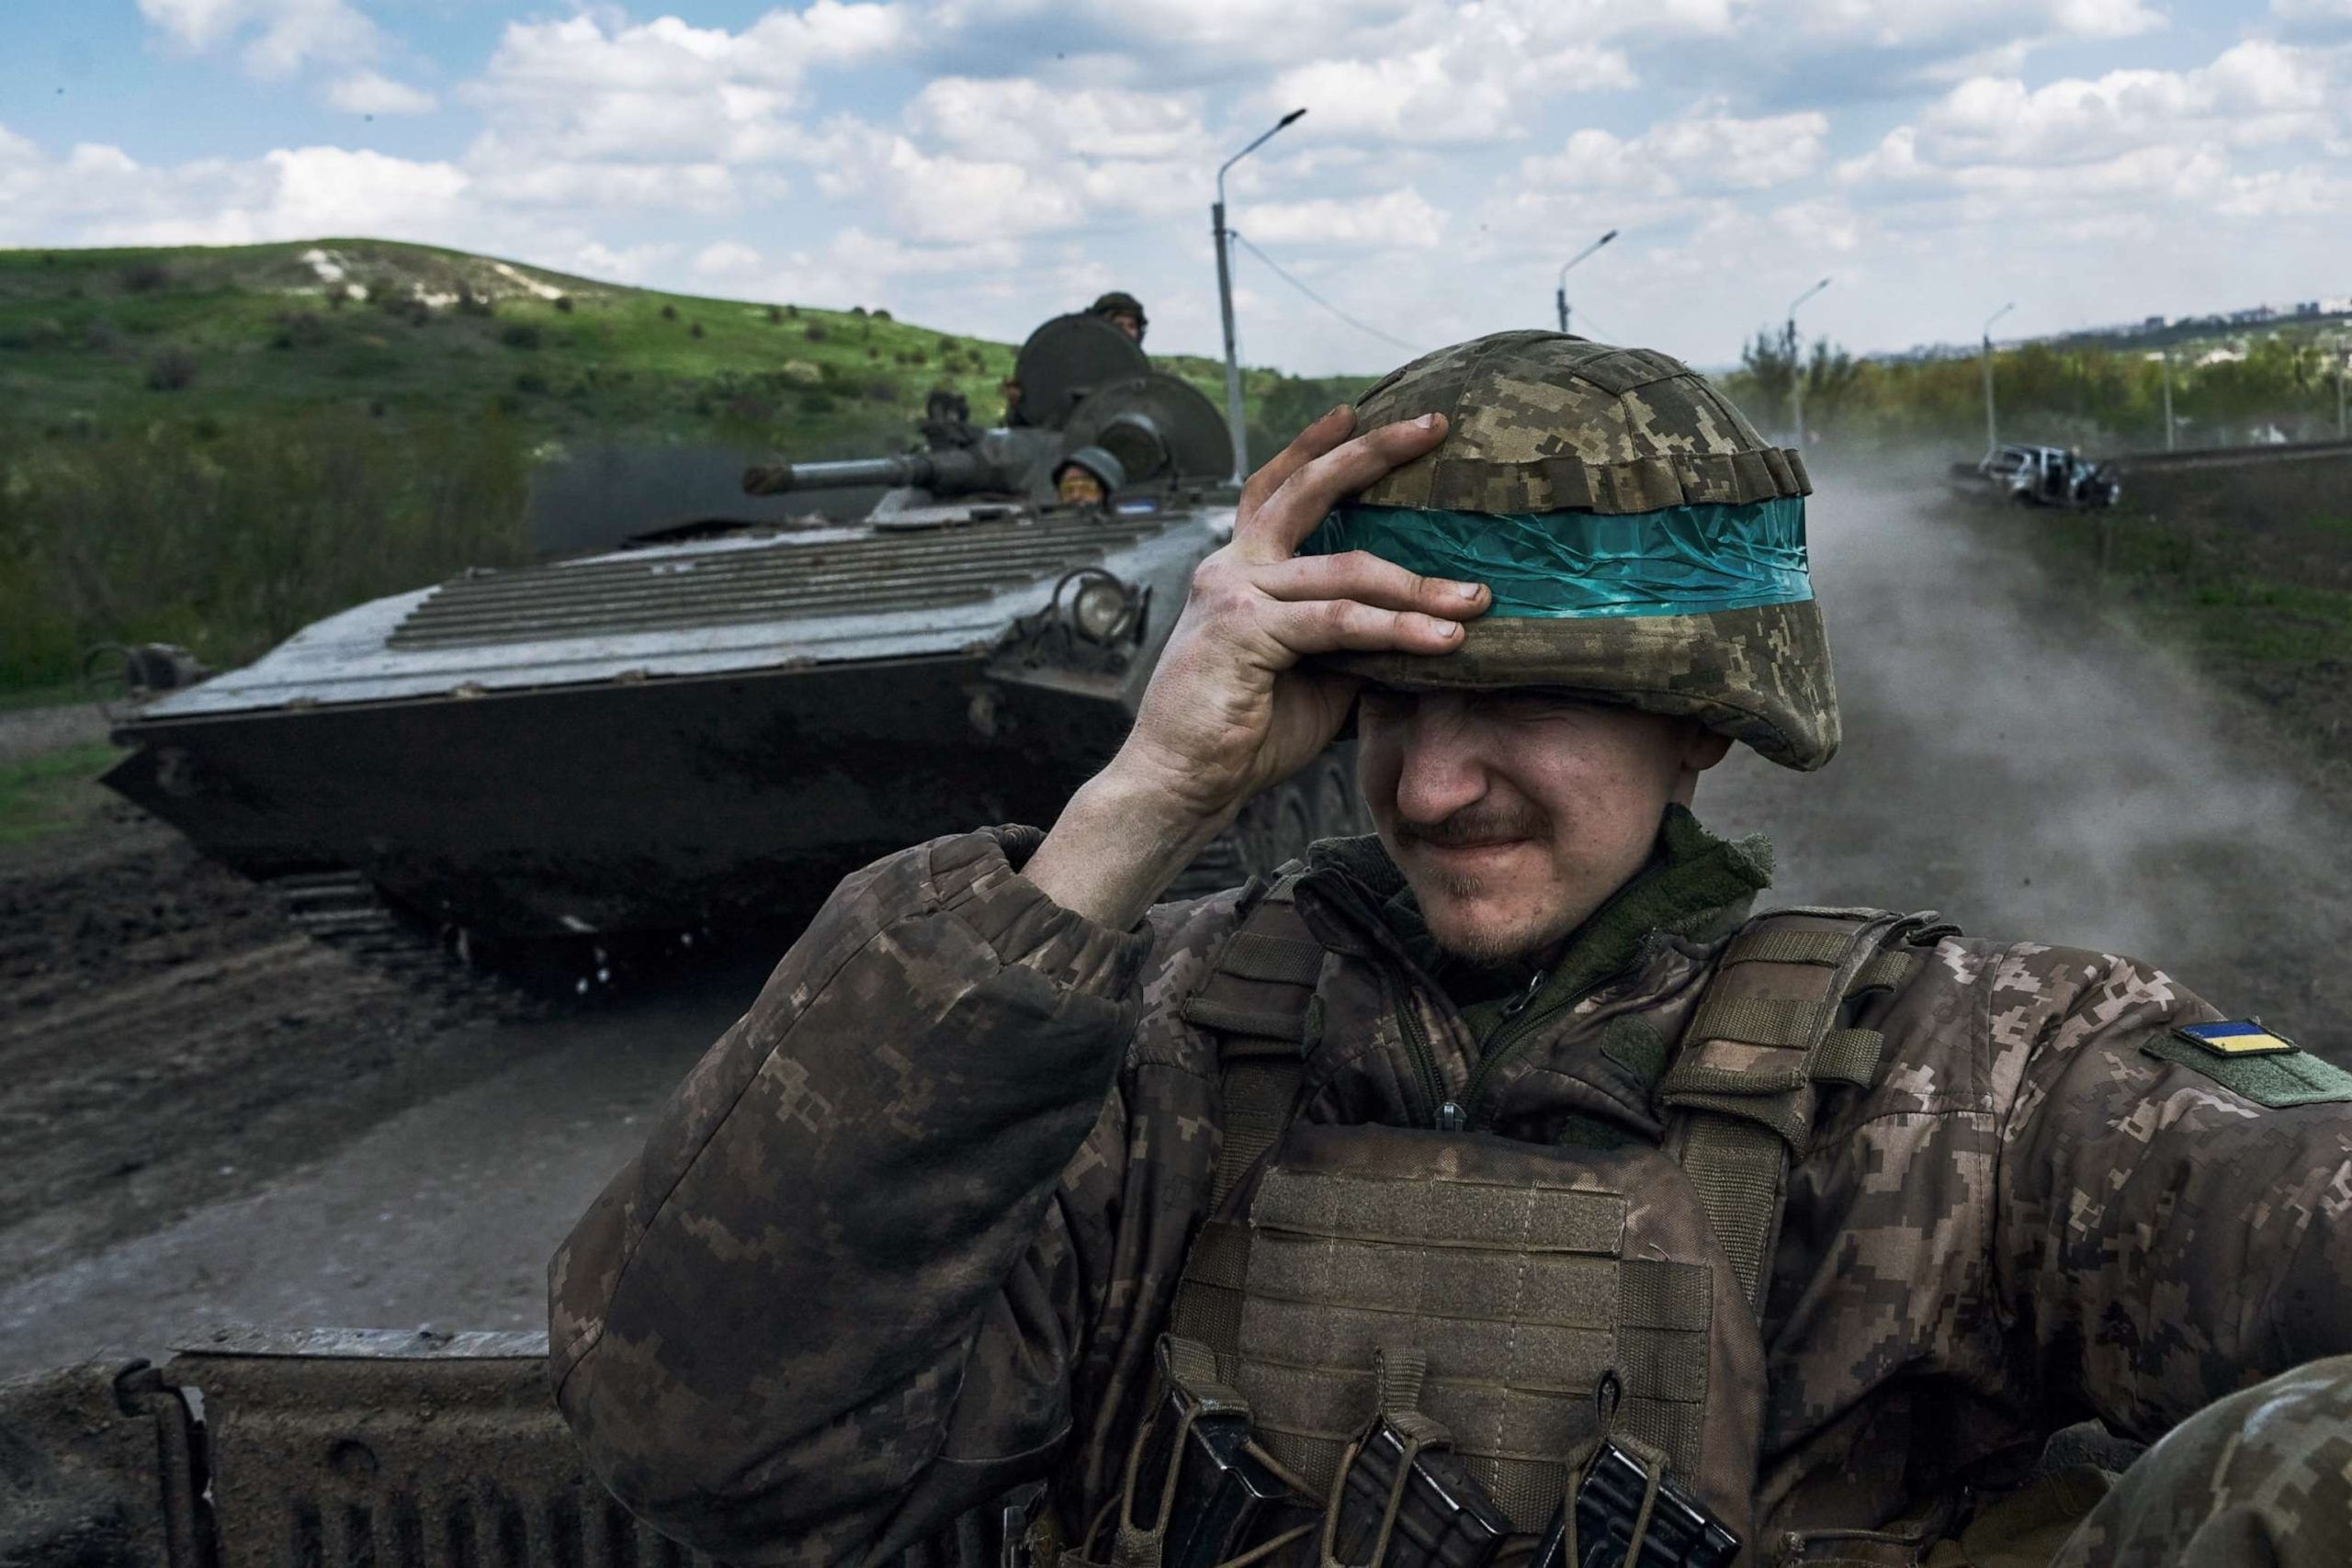 White House Announces Limited Ukraine Funding Solely for 'Critical Battlefield Requirements'